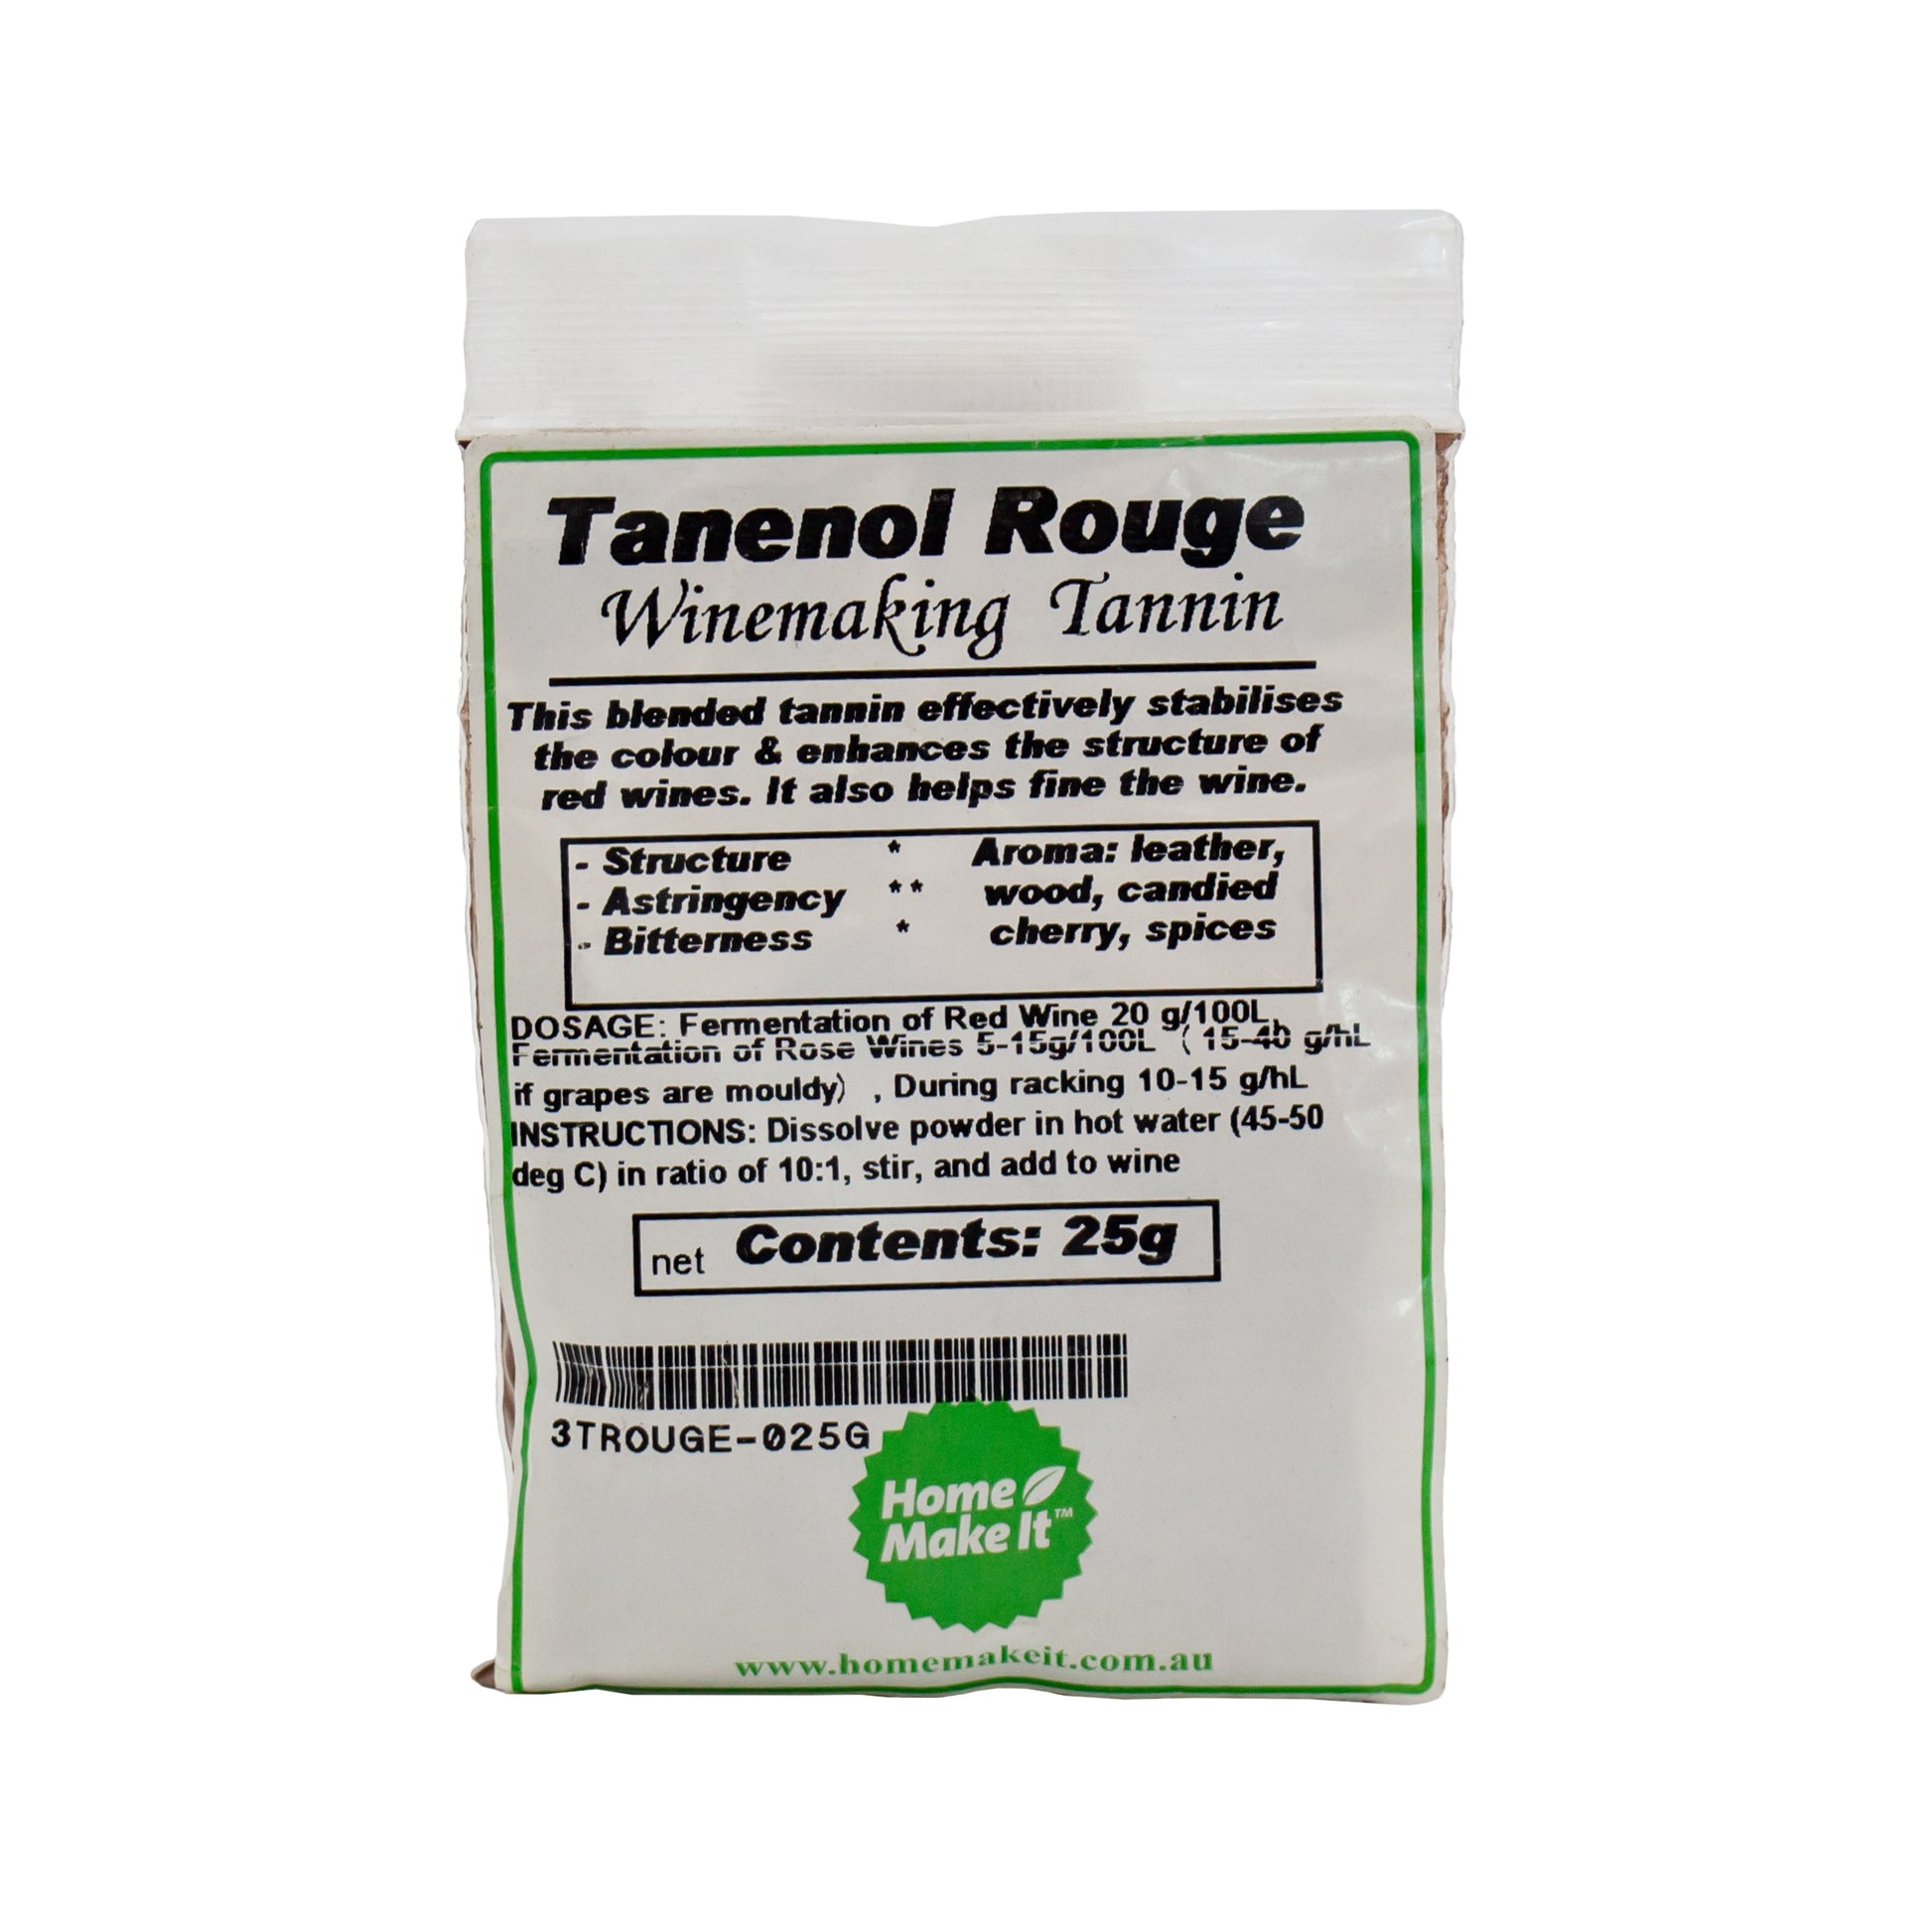 25g packet of tanenol rouge for winemaking. 